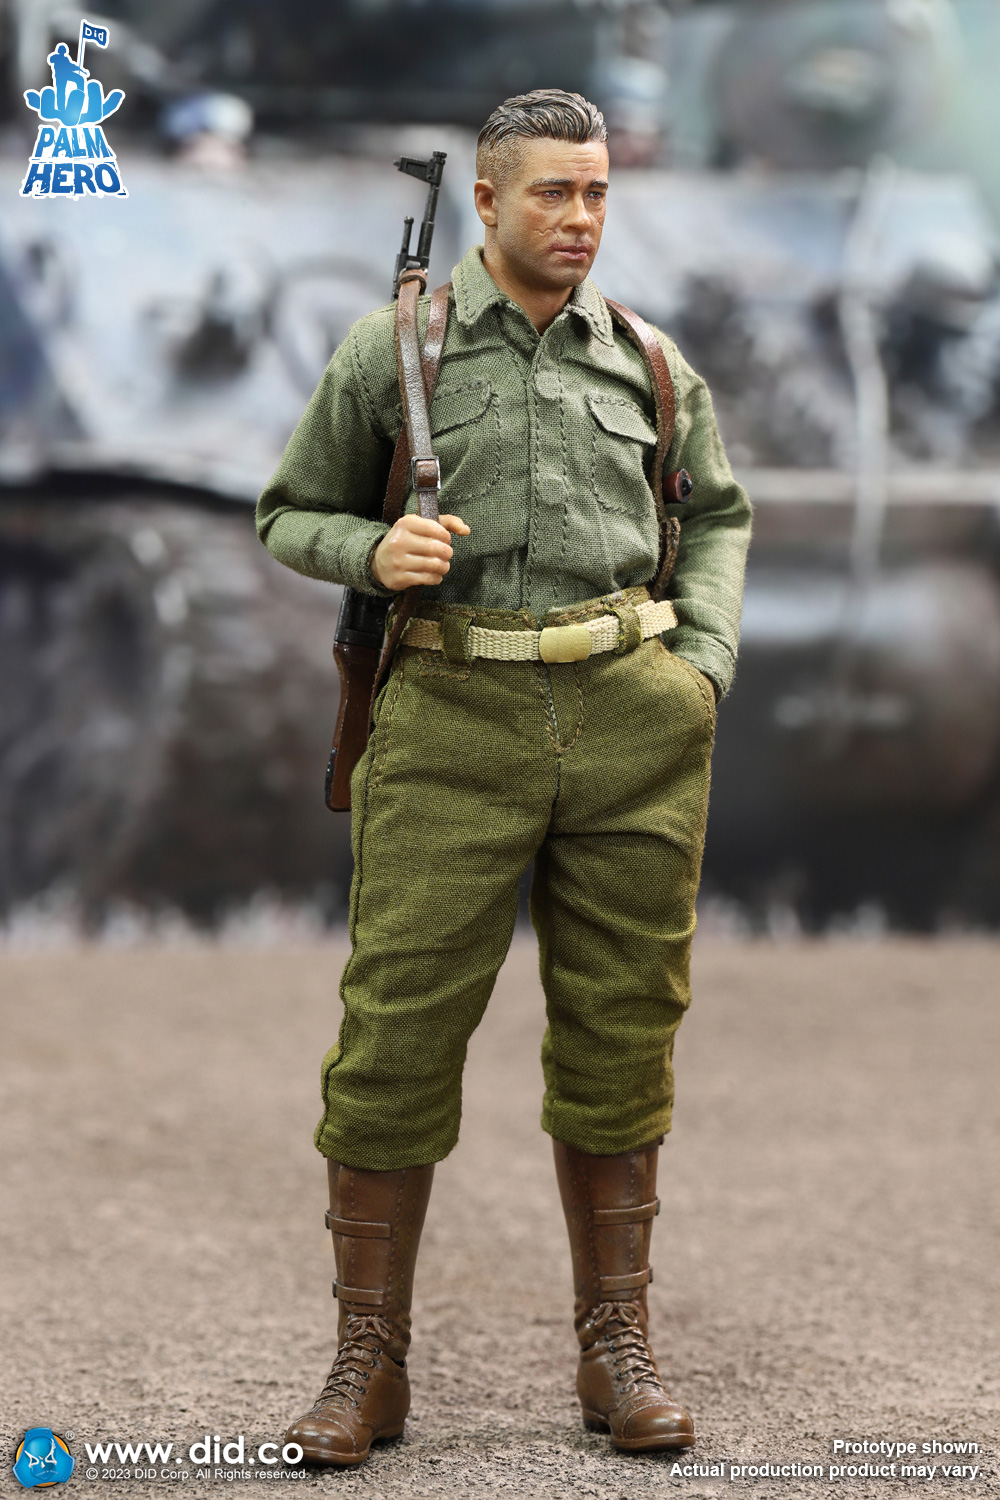 PocketHeroSeries - NEW PRODUCT: DID - 1/12 Pocket Hero Series Commander "Sherman" of the Second Armored Division of the US Army in World War II (#XA80019) 0616